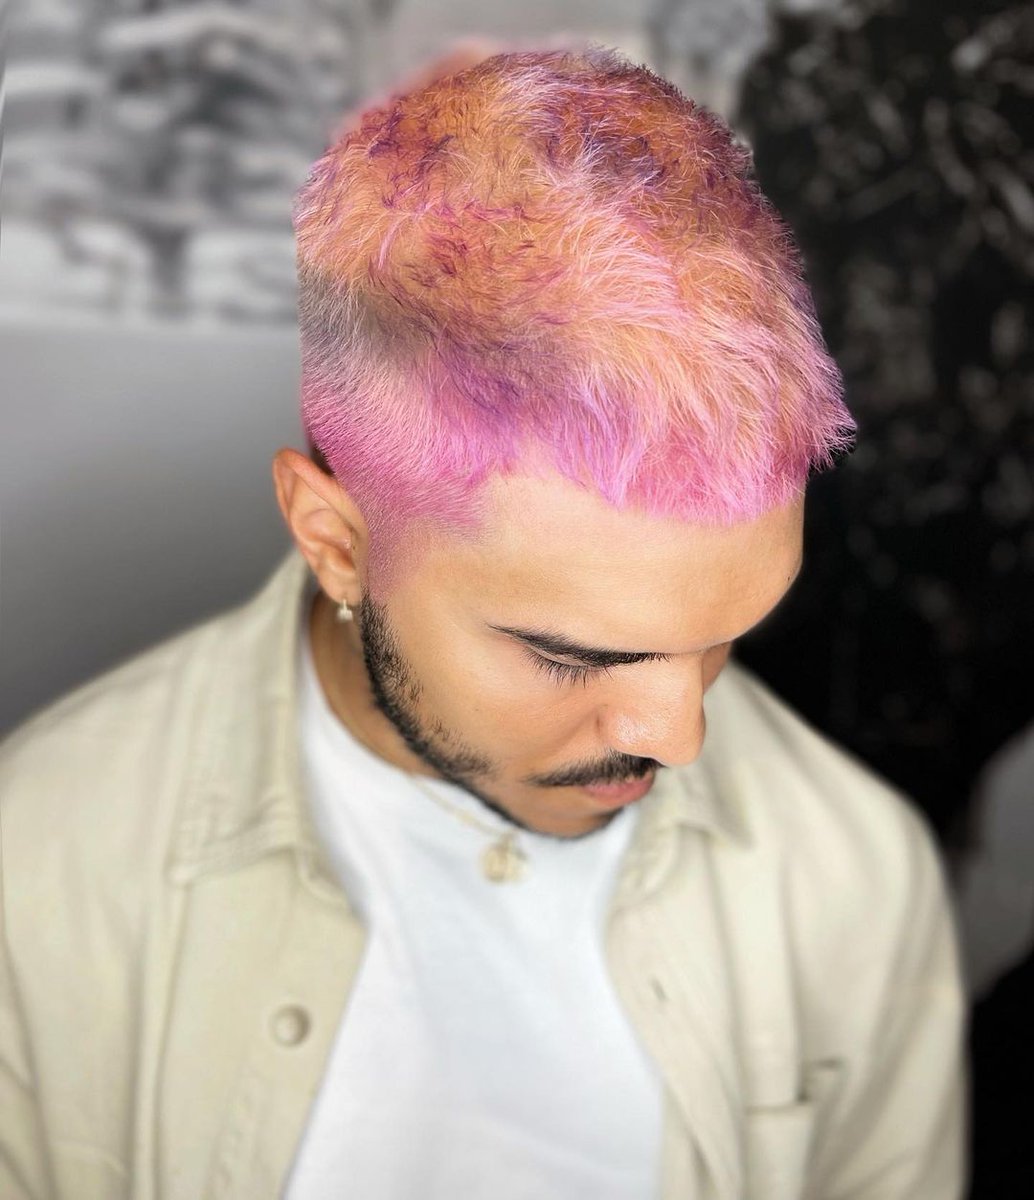 Inspo for your next hair appointment ✨💕
#Repost Meevo User: @jaggerjamessalon